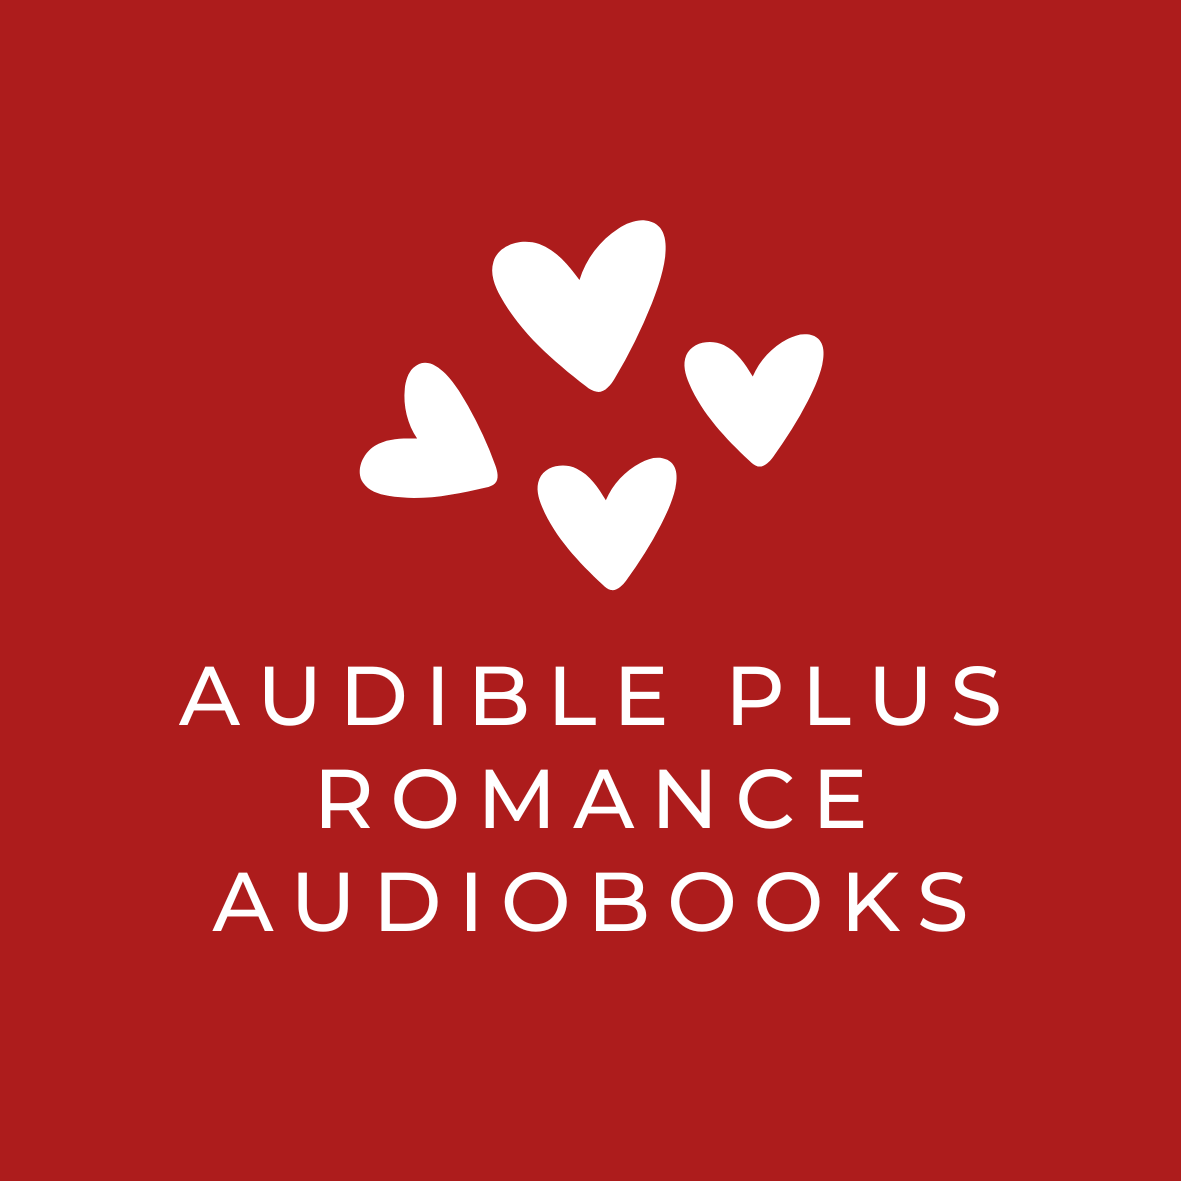 Are there any audiobook review websites for contemporary romance?